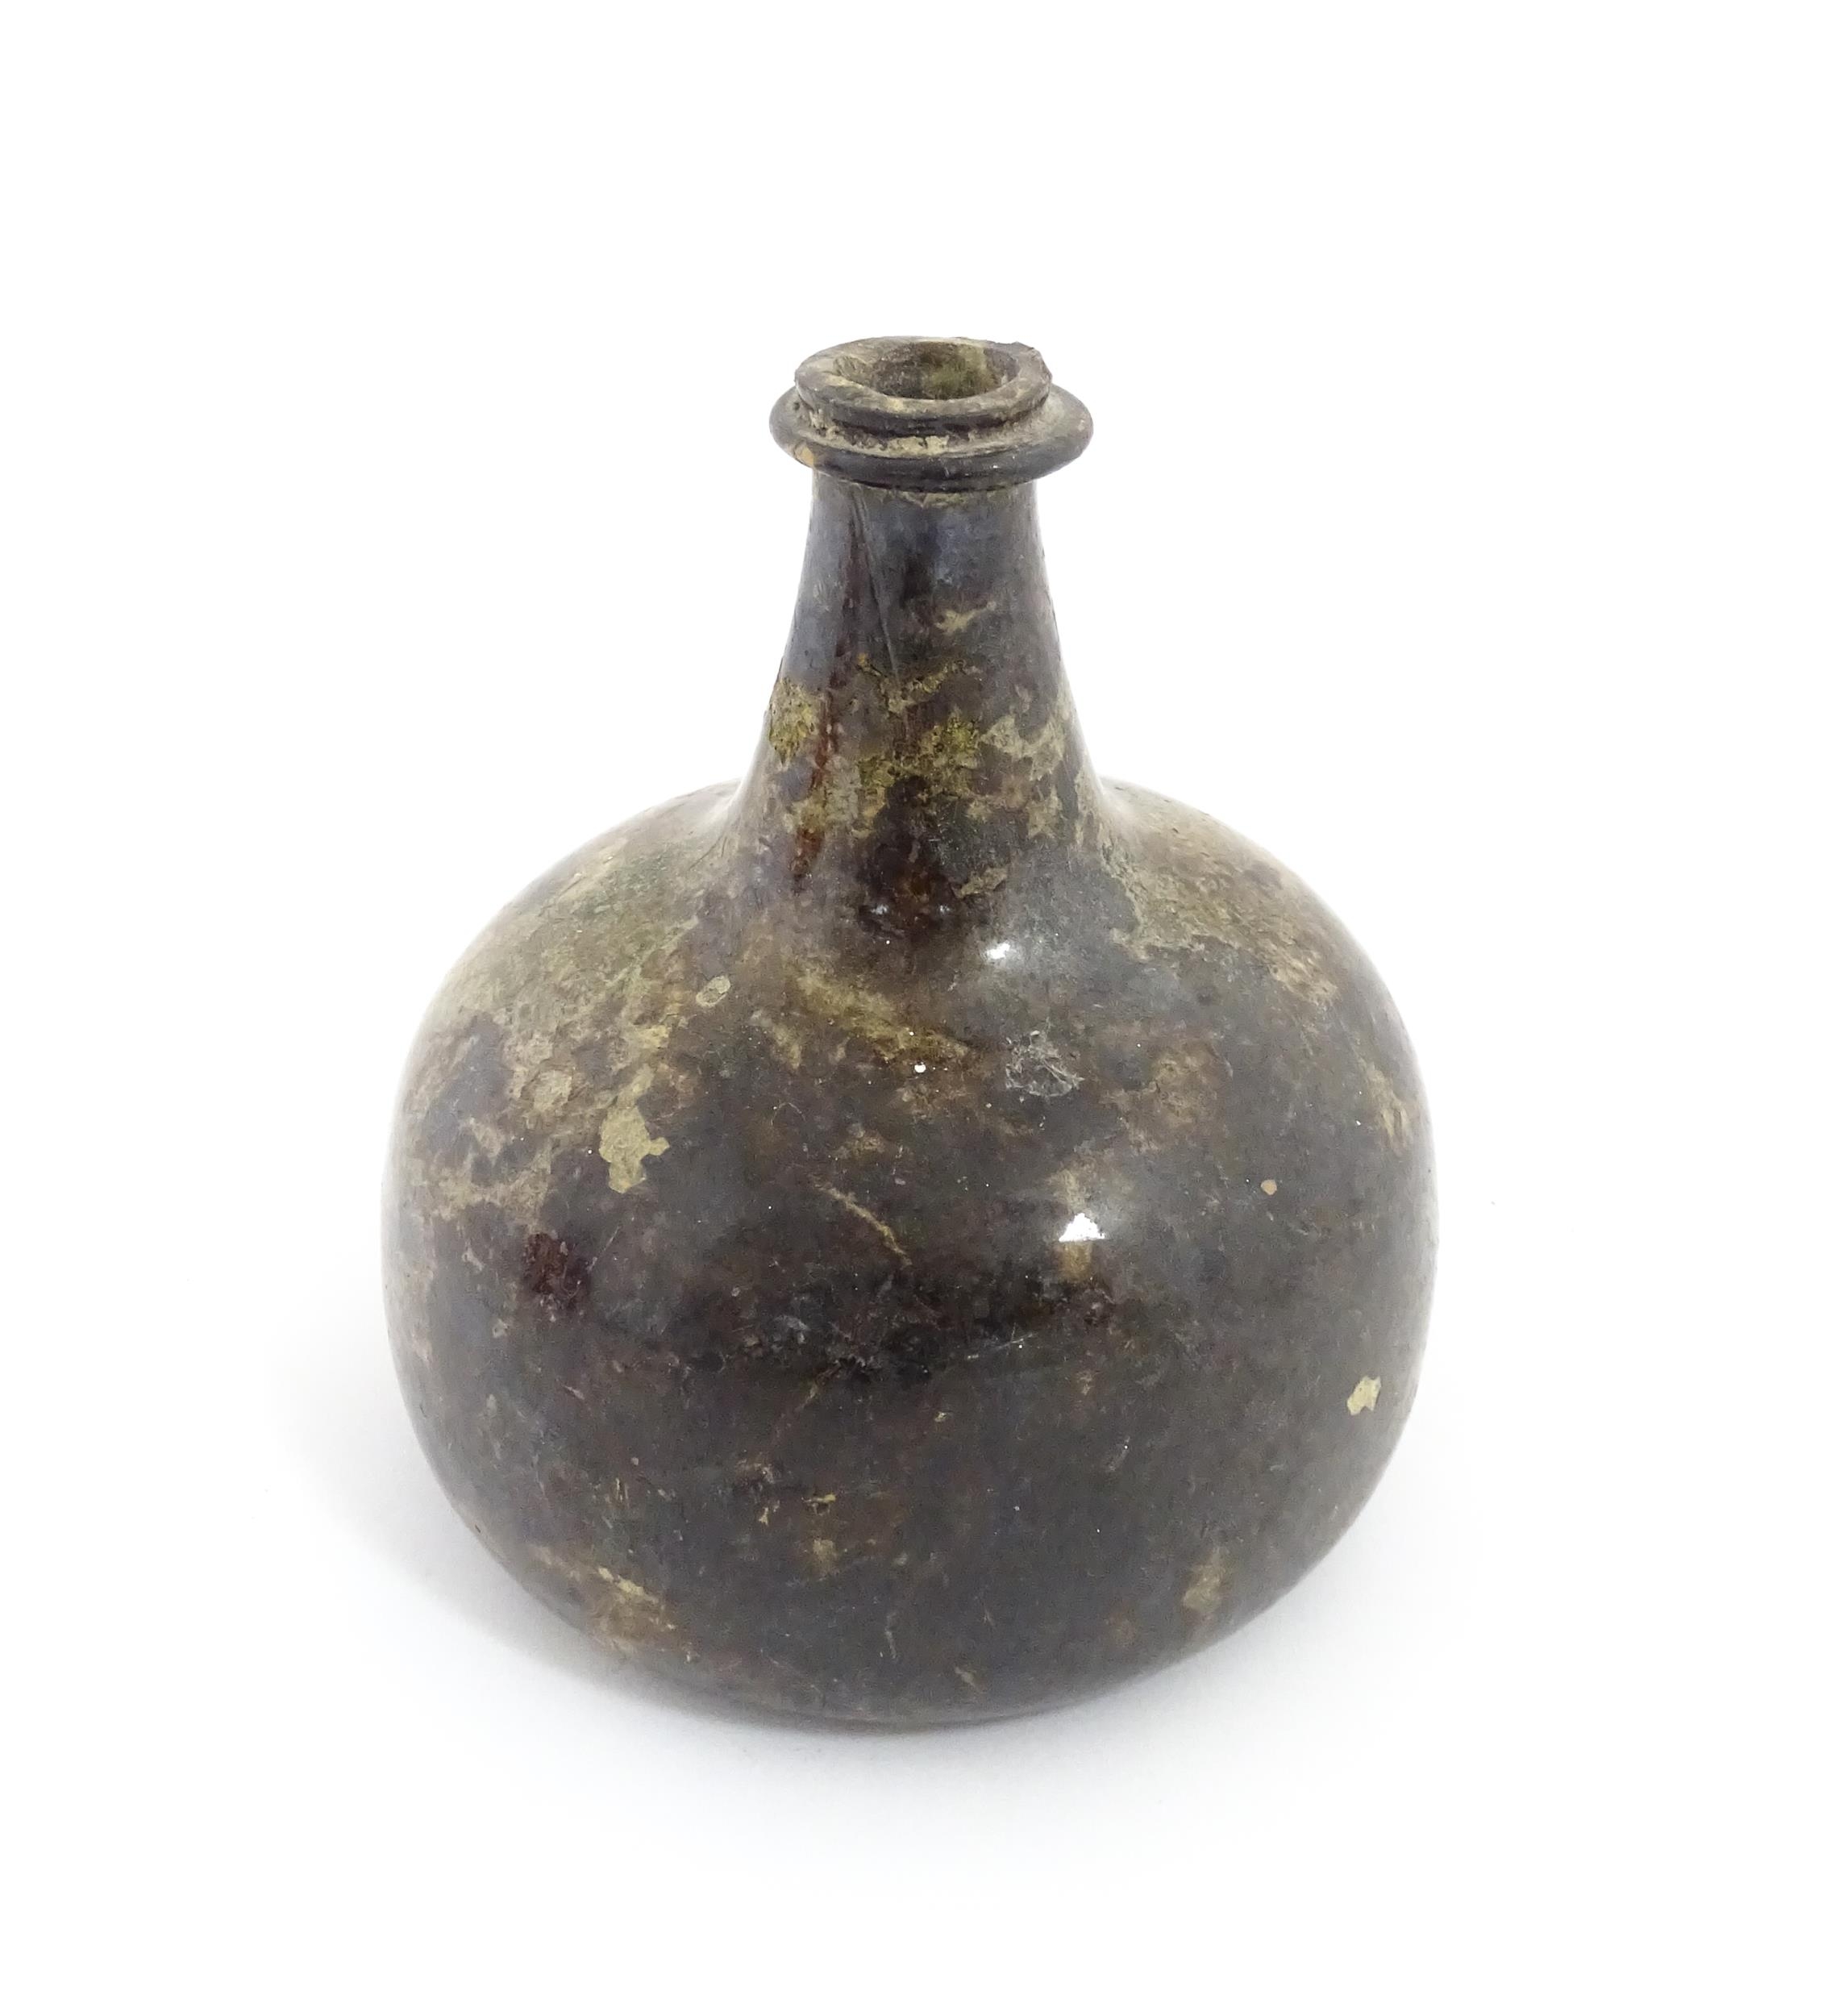 A late 18thC / early 19thC English dark olive green glass onion shape wine bottle. Approx. 6" high